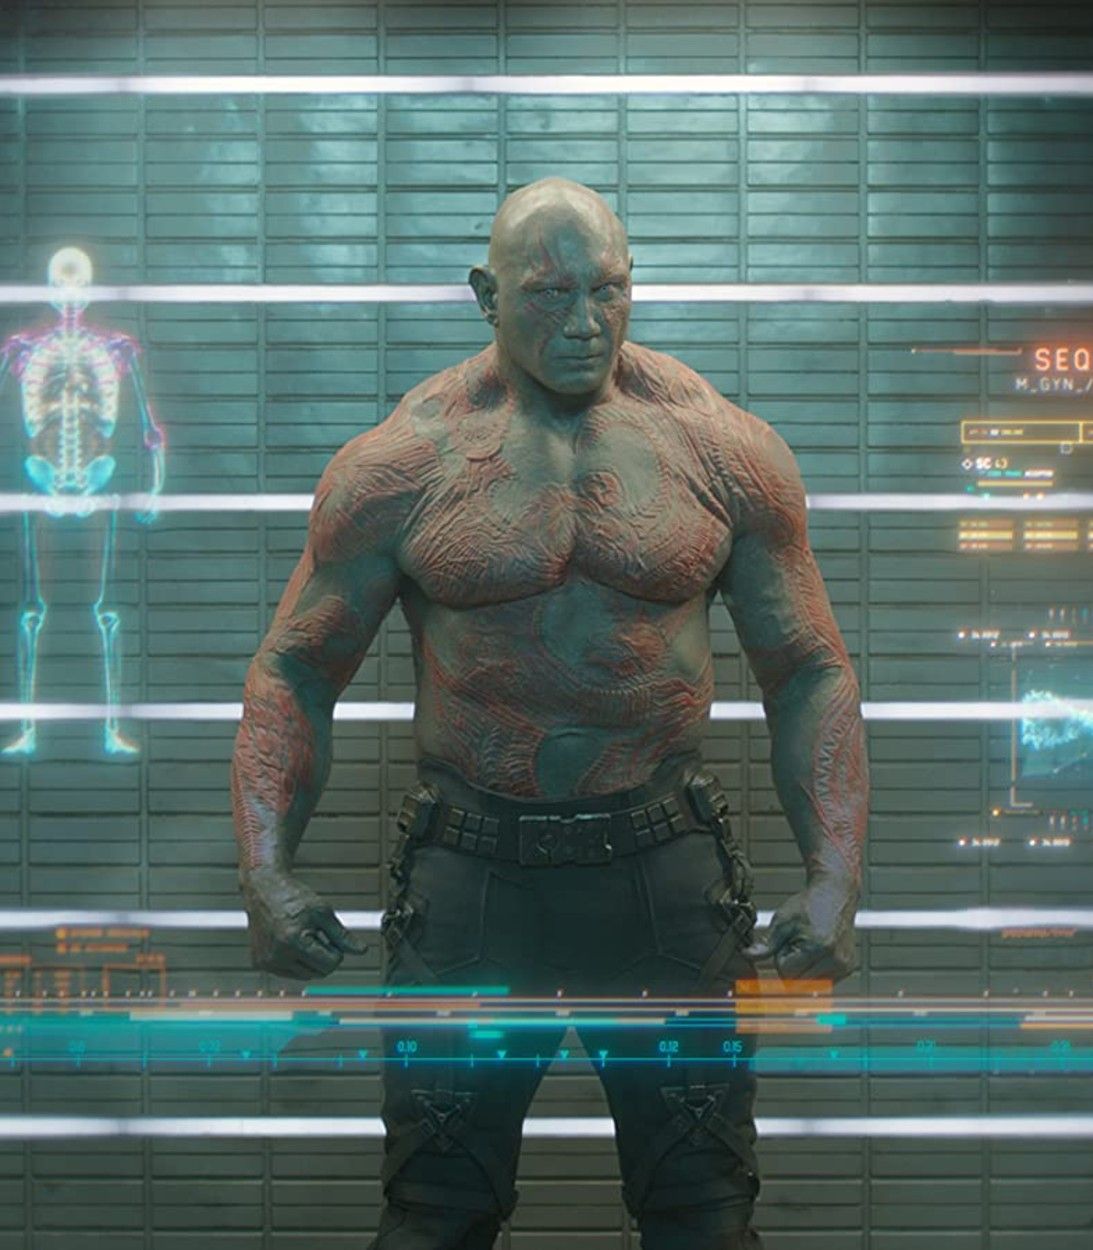 Guardians of the Galaxy Drax pic vertical